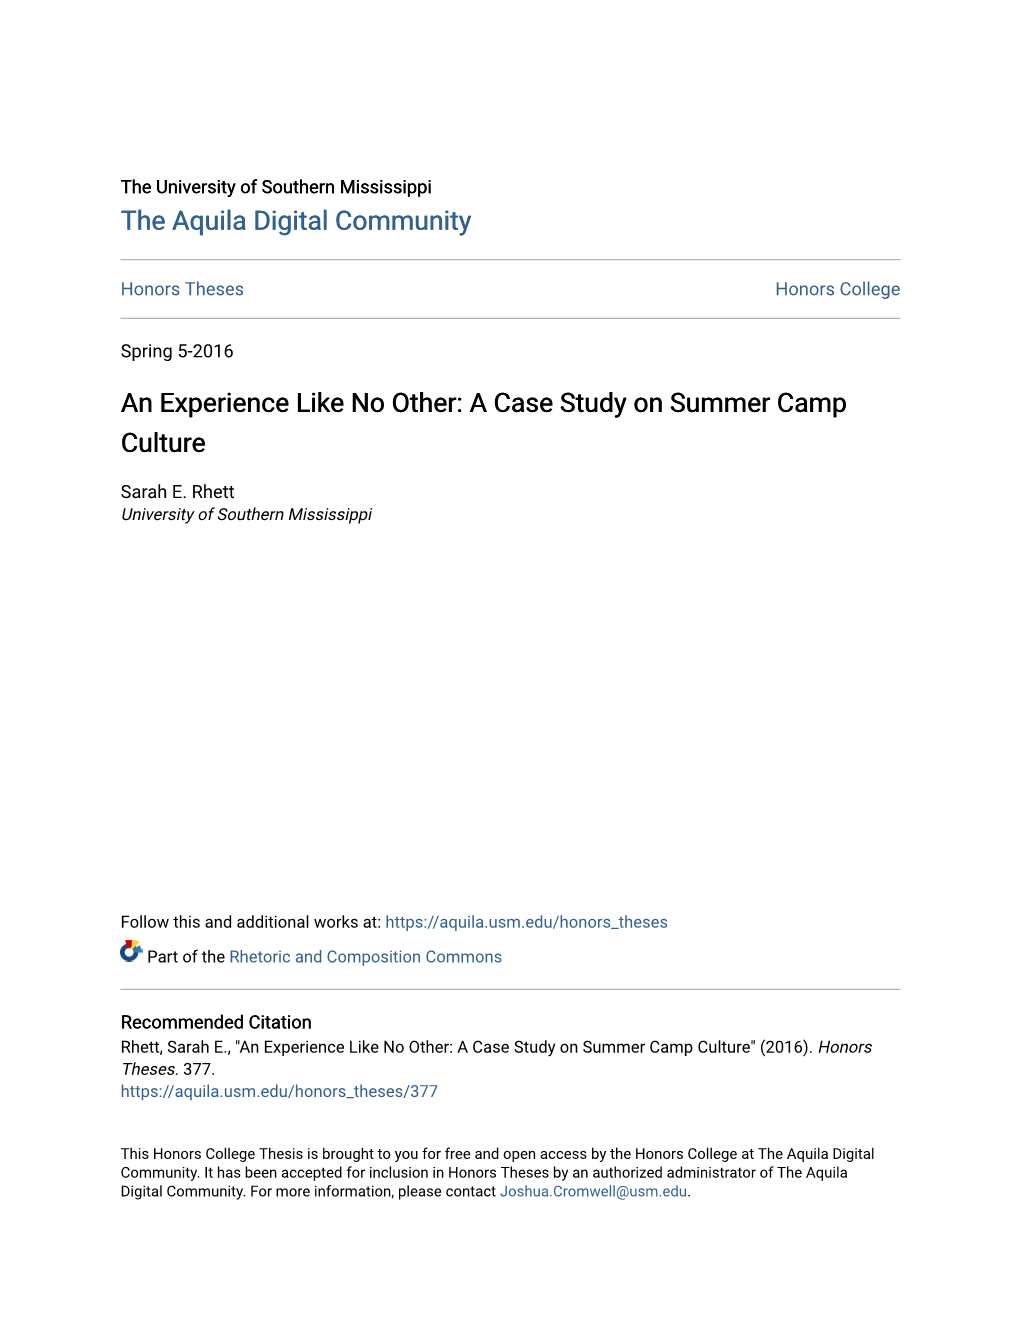 An Experience Like No Other: a Case Study on Summer Camp Culture